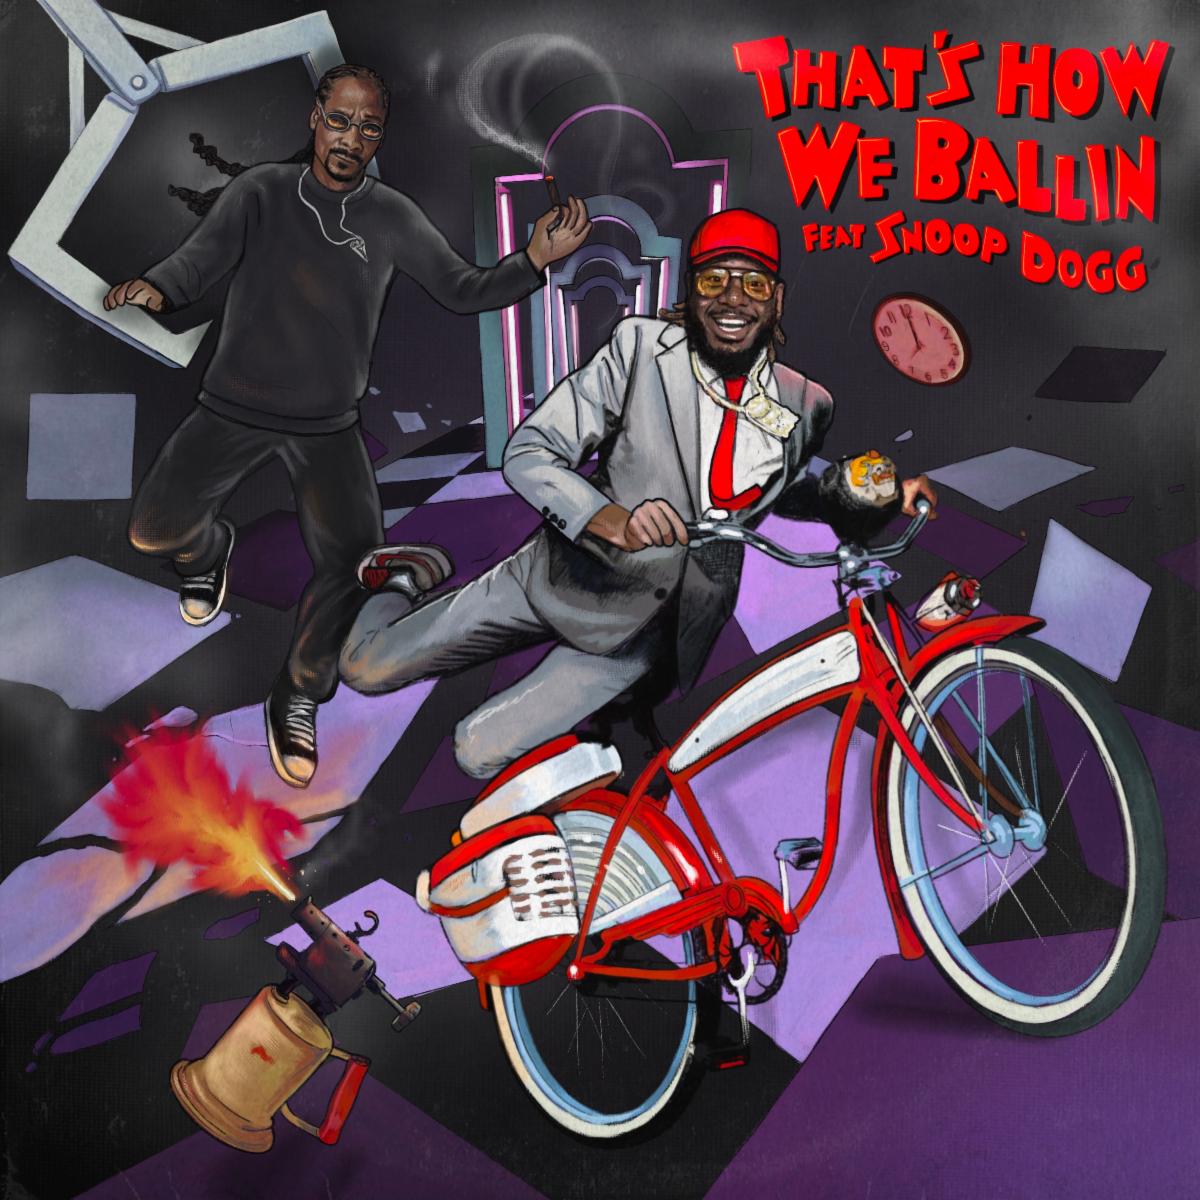 T-Pain & Snoop Dogg "That's How We Ballin" Single and Video